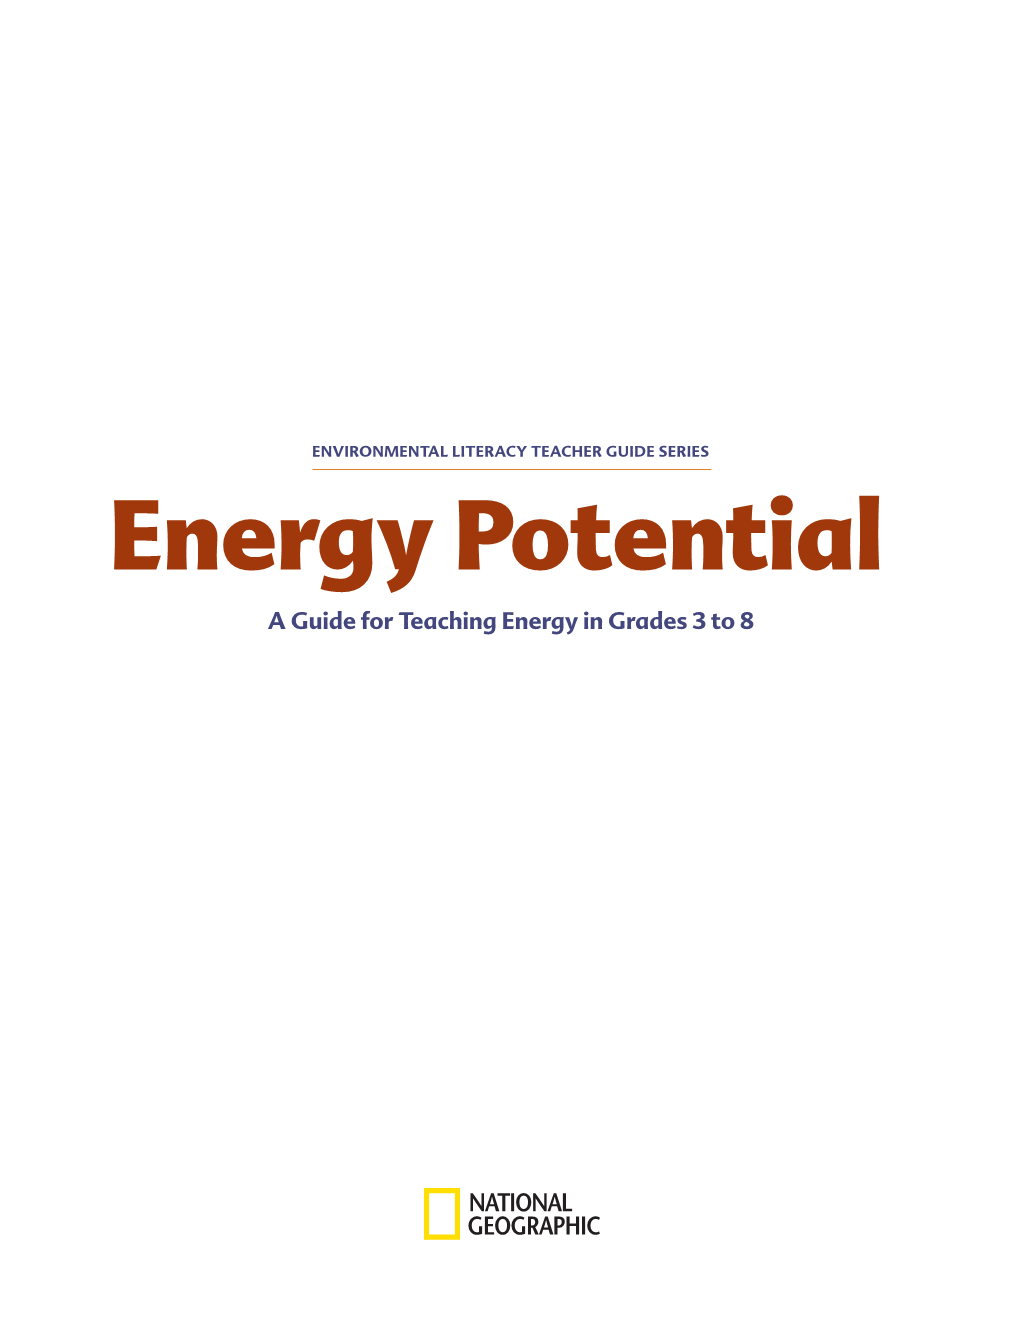 Energy Potential a Guide for Teaching Energy in Grades 3 to 8 Energy Comes in Many Forms 1 by Ivan Salinas